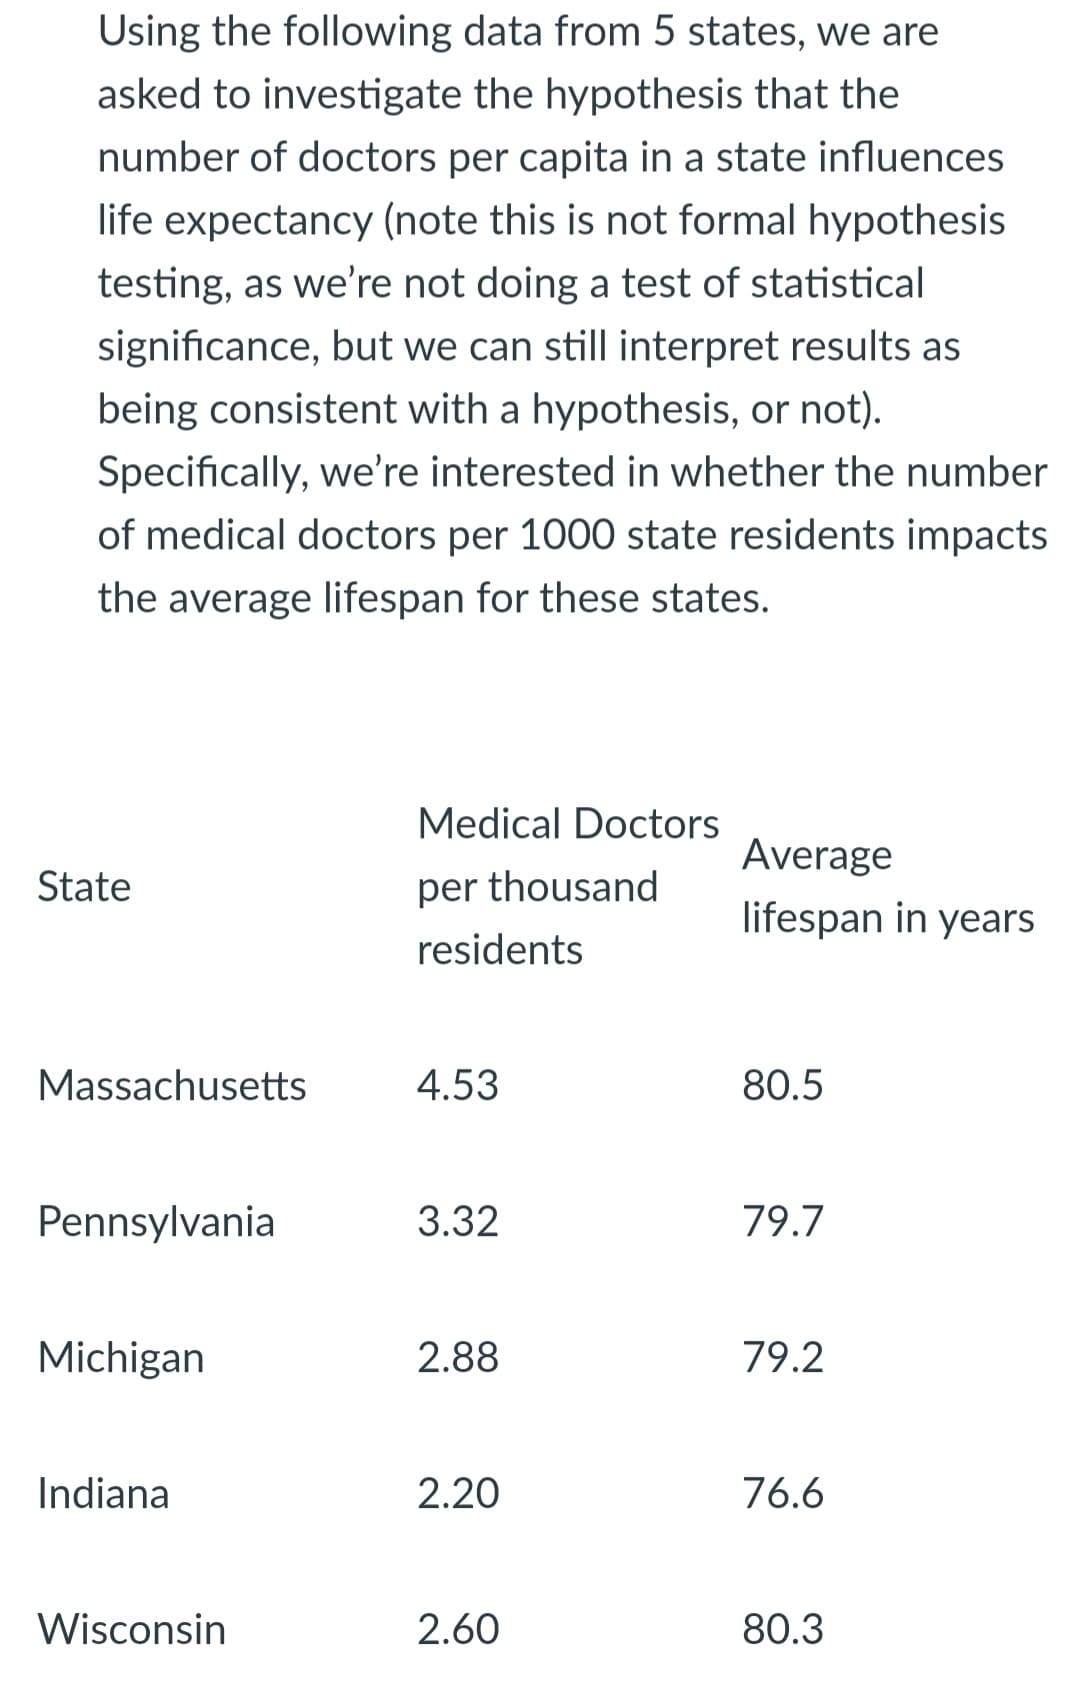 Using the following data from 5 states, we are
asked to investigate the hypothesis that the
number of doctors per capita in a state influences
life expectancy (note this is not formal hypothesis
testing, as we're not doing a test of statistical
significance, but we can still interpret results as
being consistent with a hypothesis, or not).
Specifically, we're interested in whether the number
of medical doctors per 1000 state residents impacts
the average lifespan for these states.
Medical Doctors
Average
State
per thousand
lifespan in years
residents
Massachusetts
4.53
80.5
Pennsylvania
3.32
79.7
Michigan
2.88
79.2
Indiana
2.20
76.6
Wisconsin
2.60
80.3
